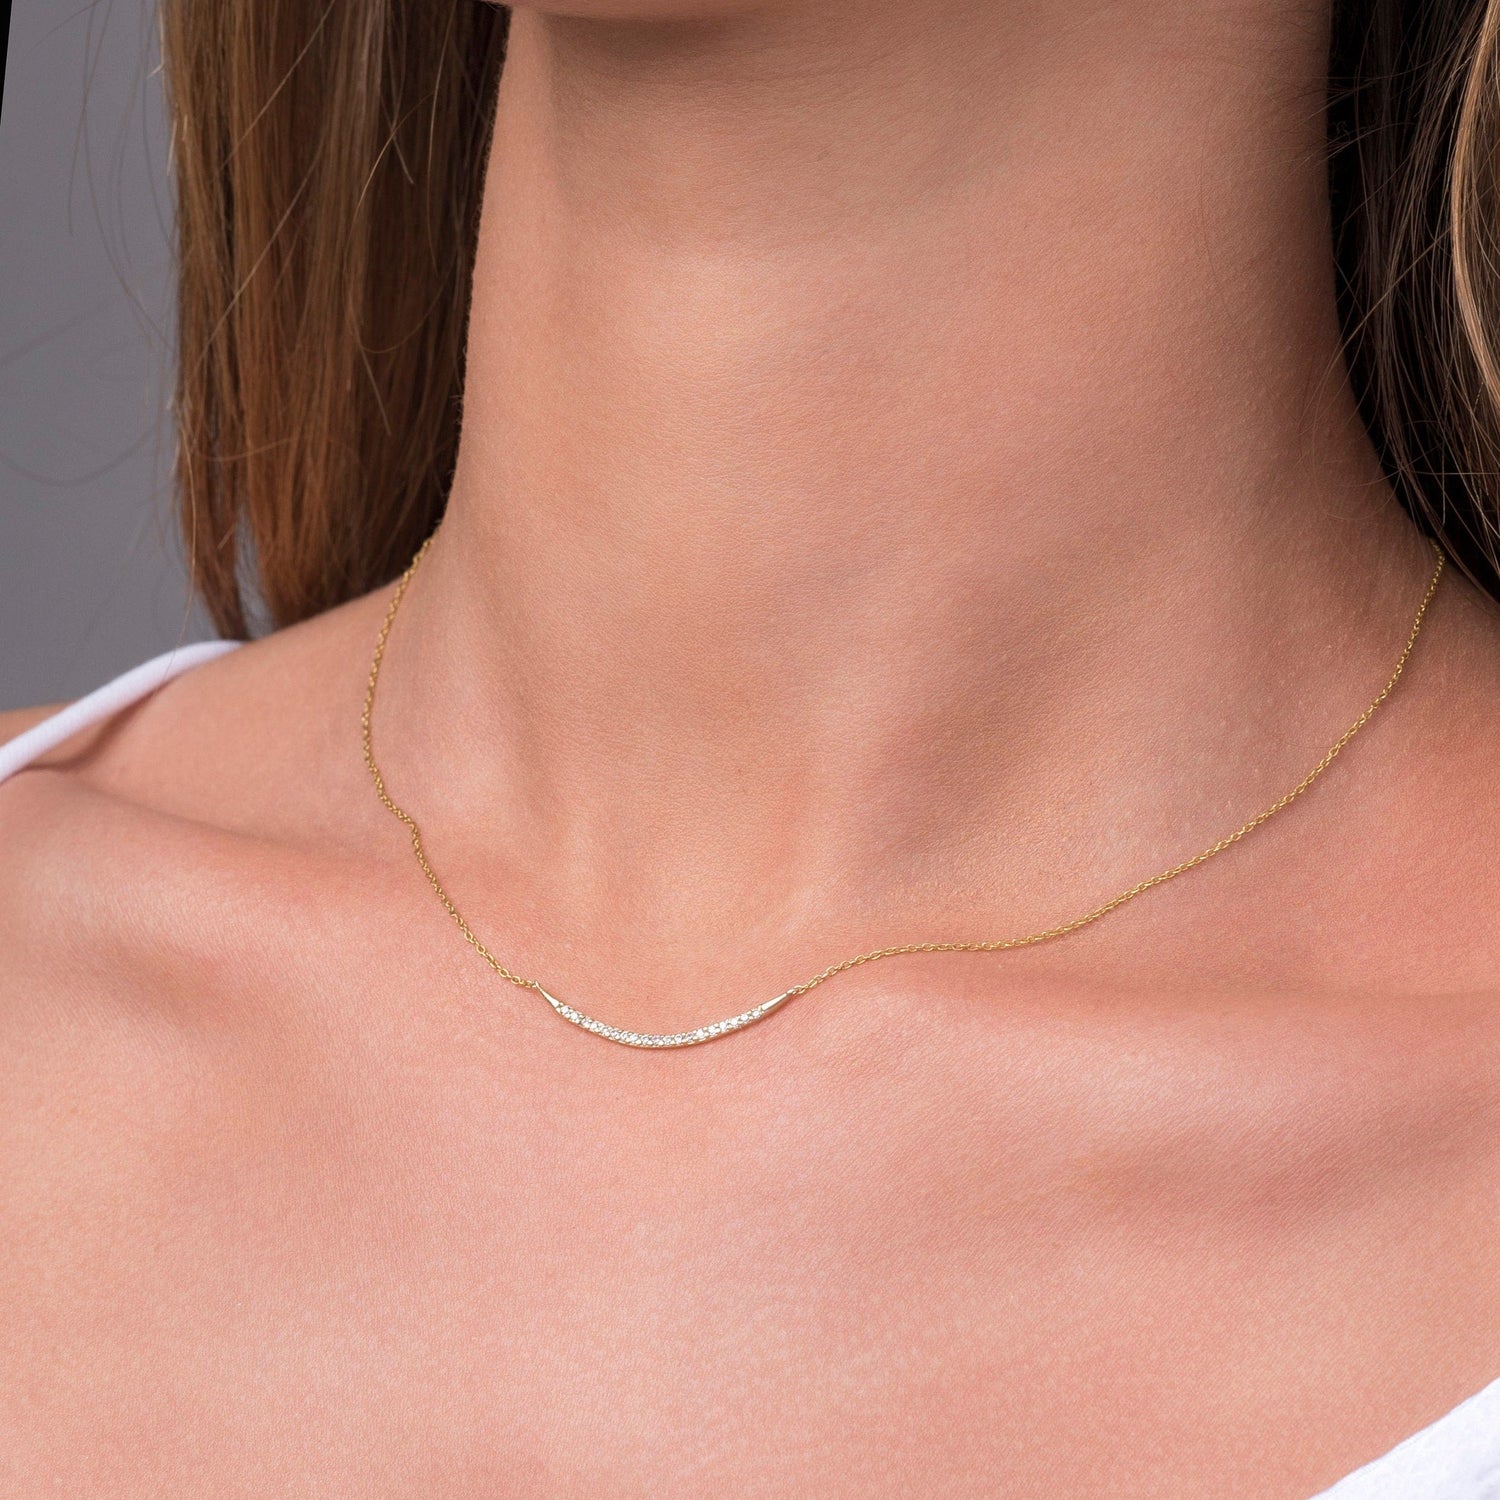 Bar Diamond Necklace / 14K Solid Gold Curved Bar Diamond Necklace 0.18ct / Pave Diamond Bar Necklace /  Cyber Monday Sale / Holiday Sale